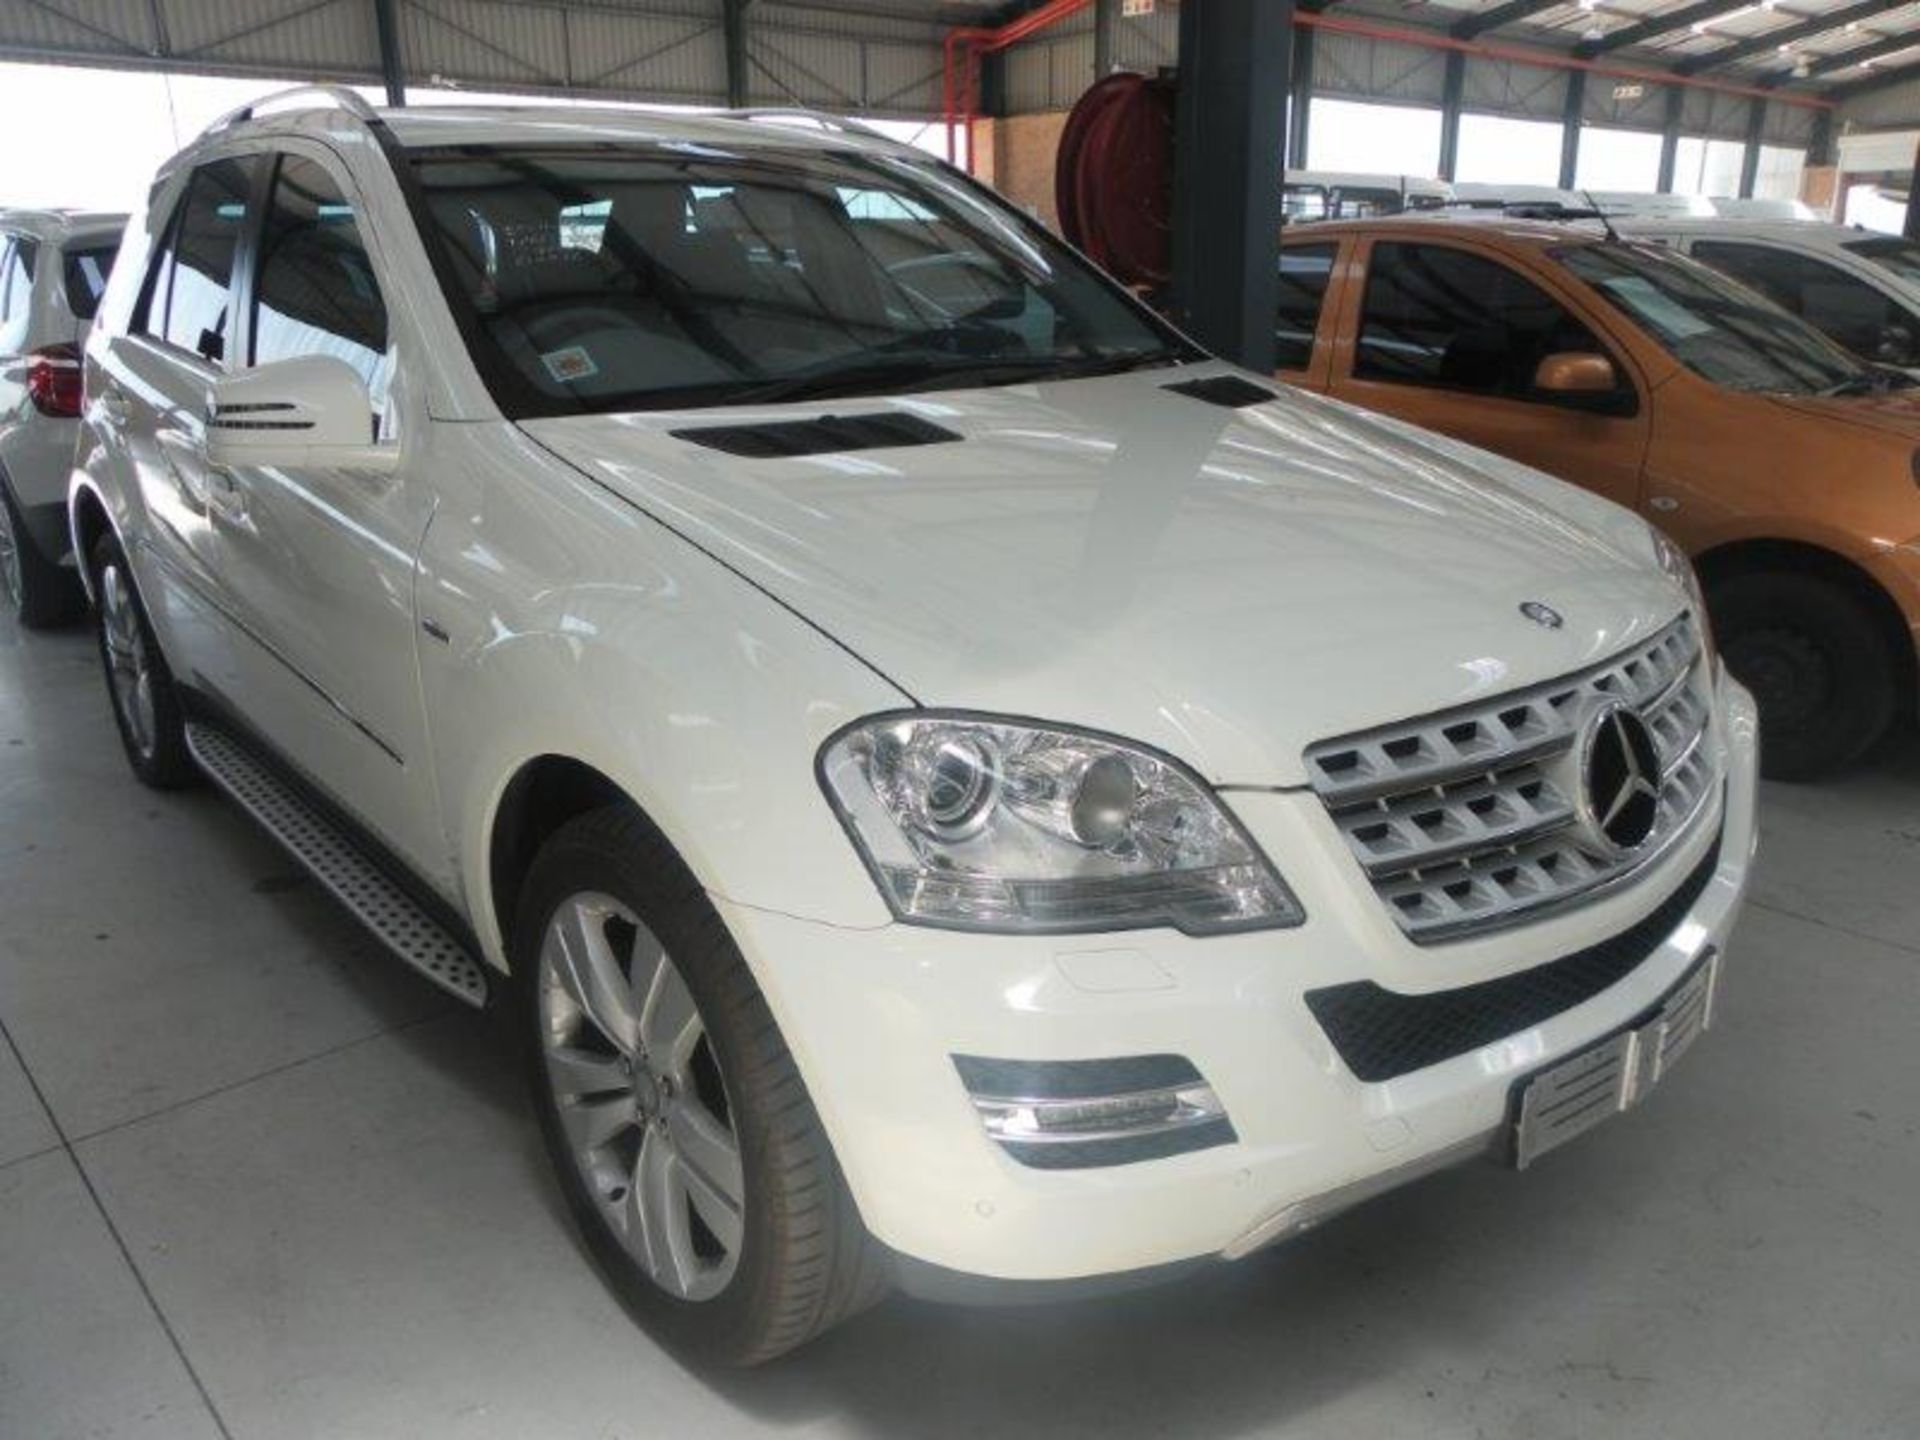 2011 MADOSINFS Mercedes-Benz ML350 CDI 4Matic (Vin No: WDC1641222A656827 )(50023 kms) Suggested - Image 2 of 5